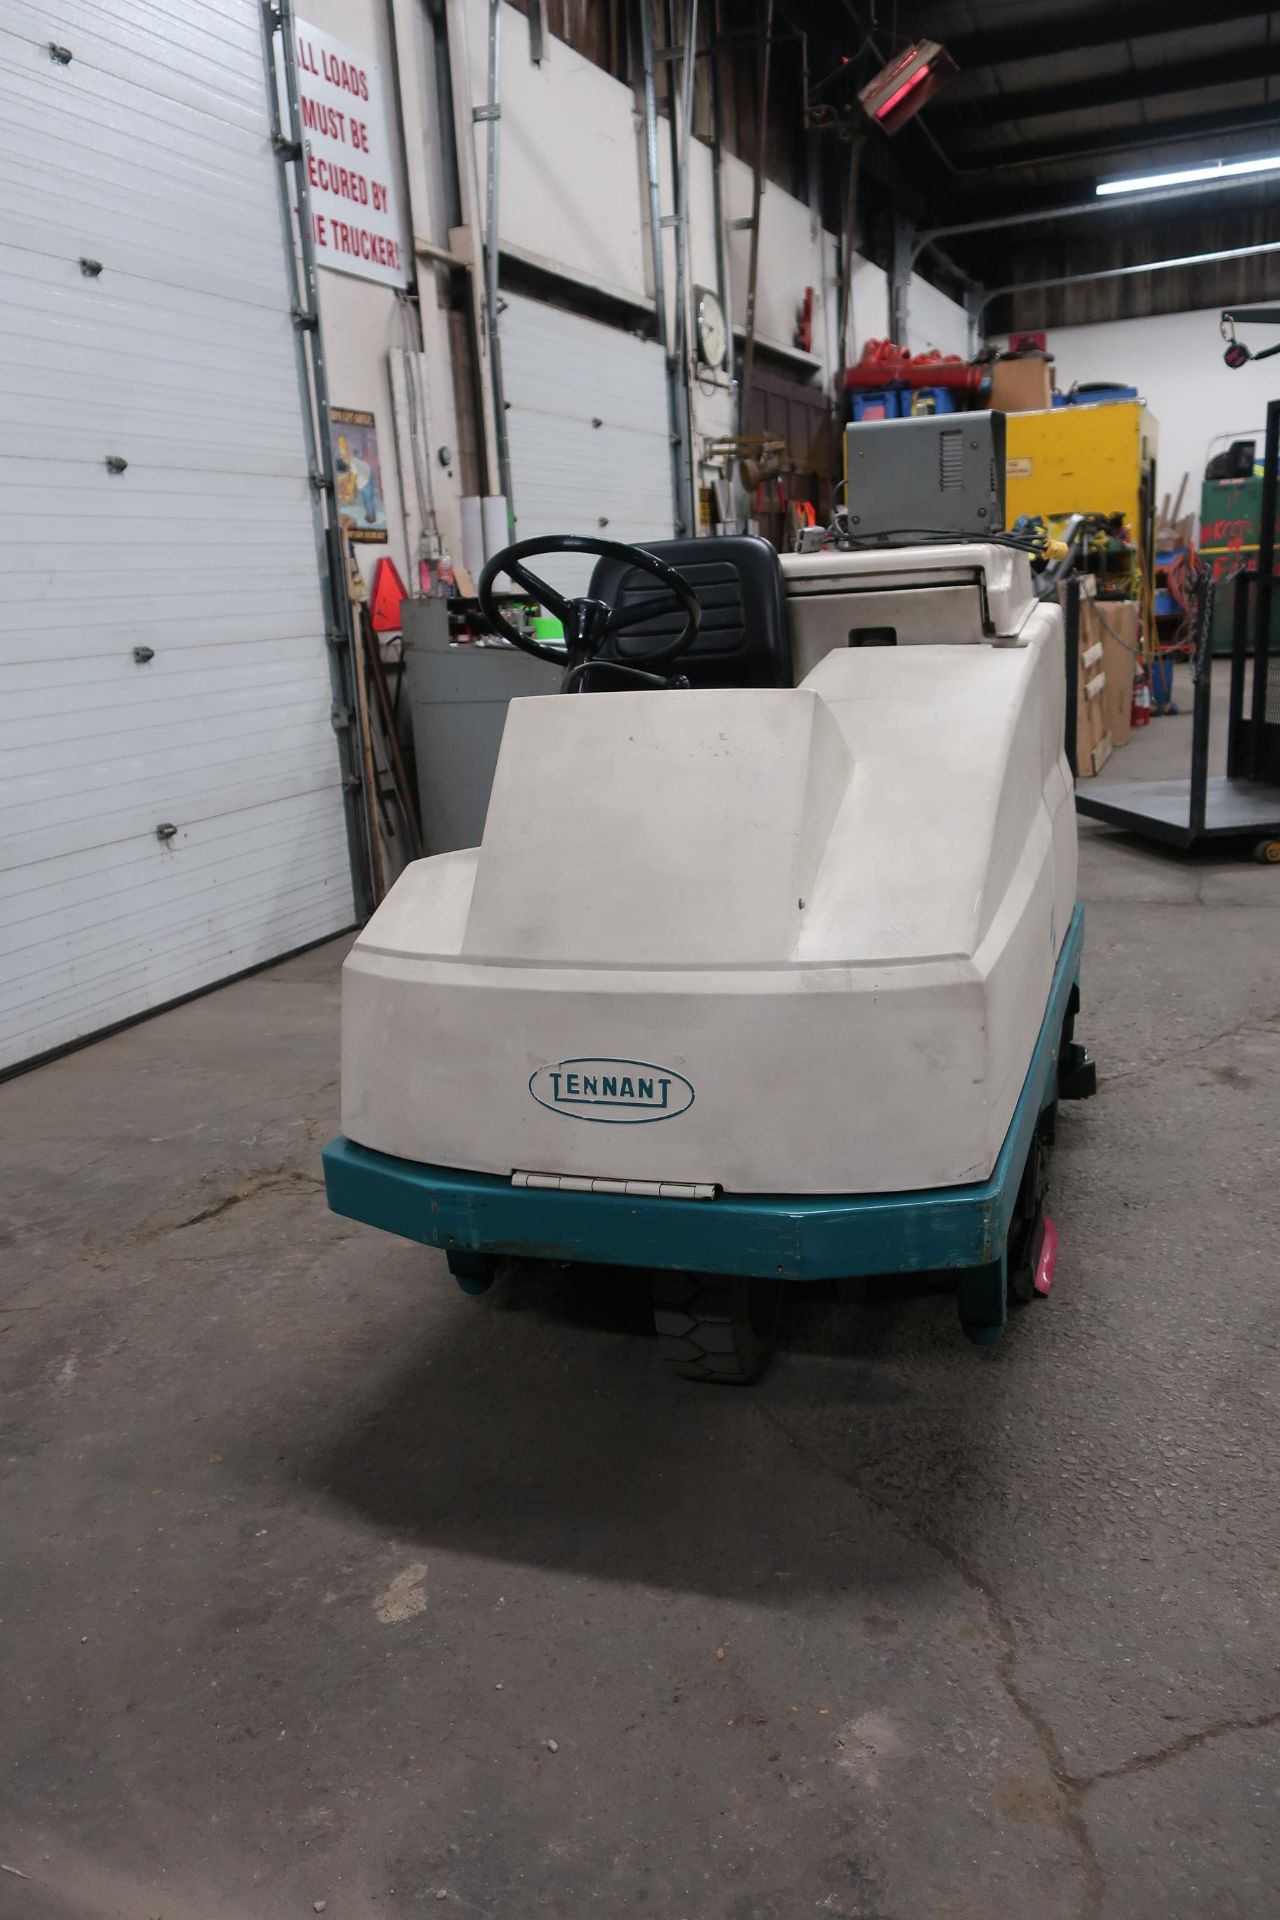 Tennant 510E Ride On Power Scrubber Sweeper Power-Operated Cleaning Machine - Electric with - Image 2 of 4